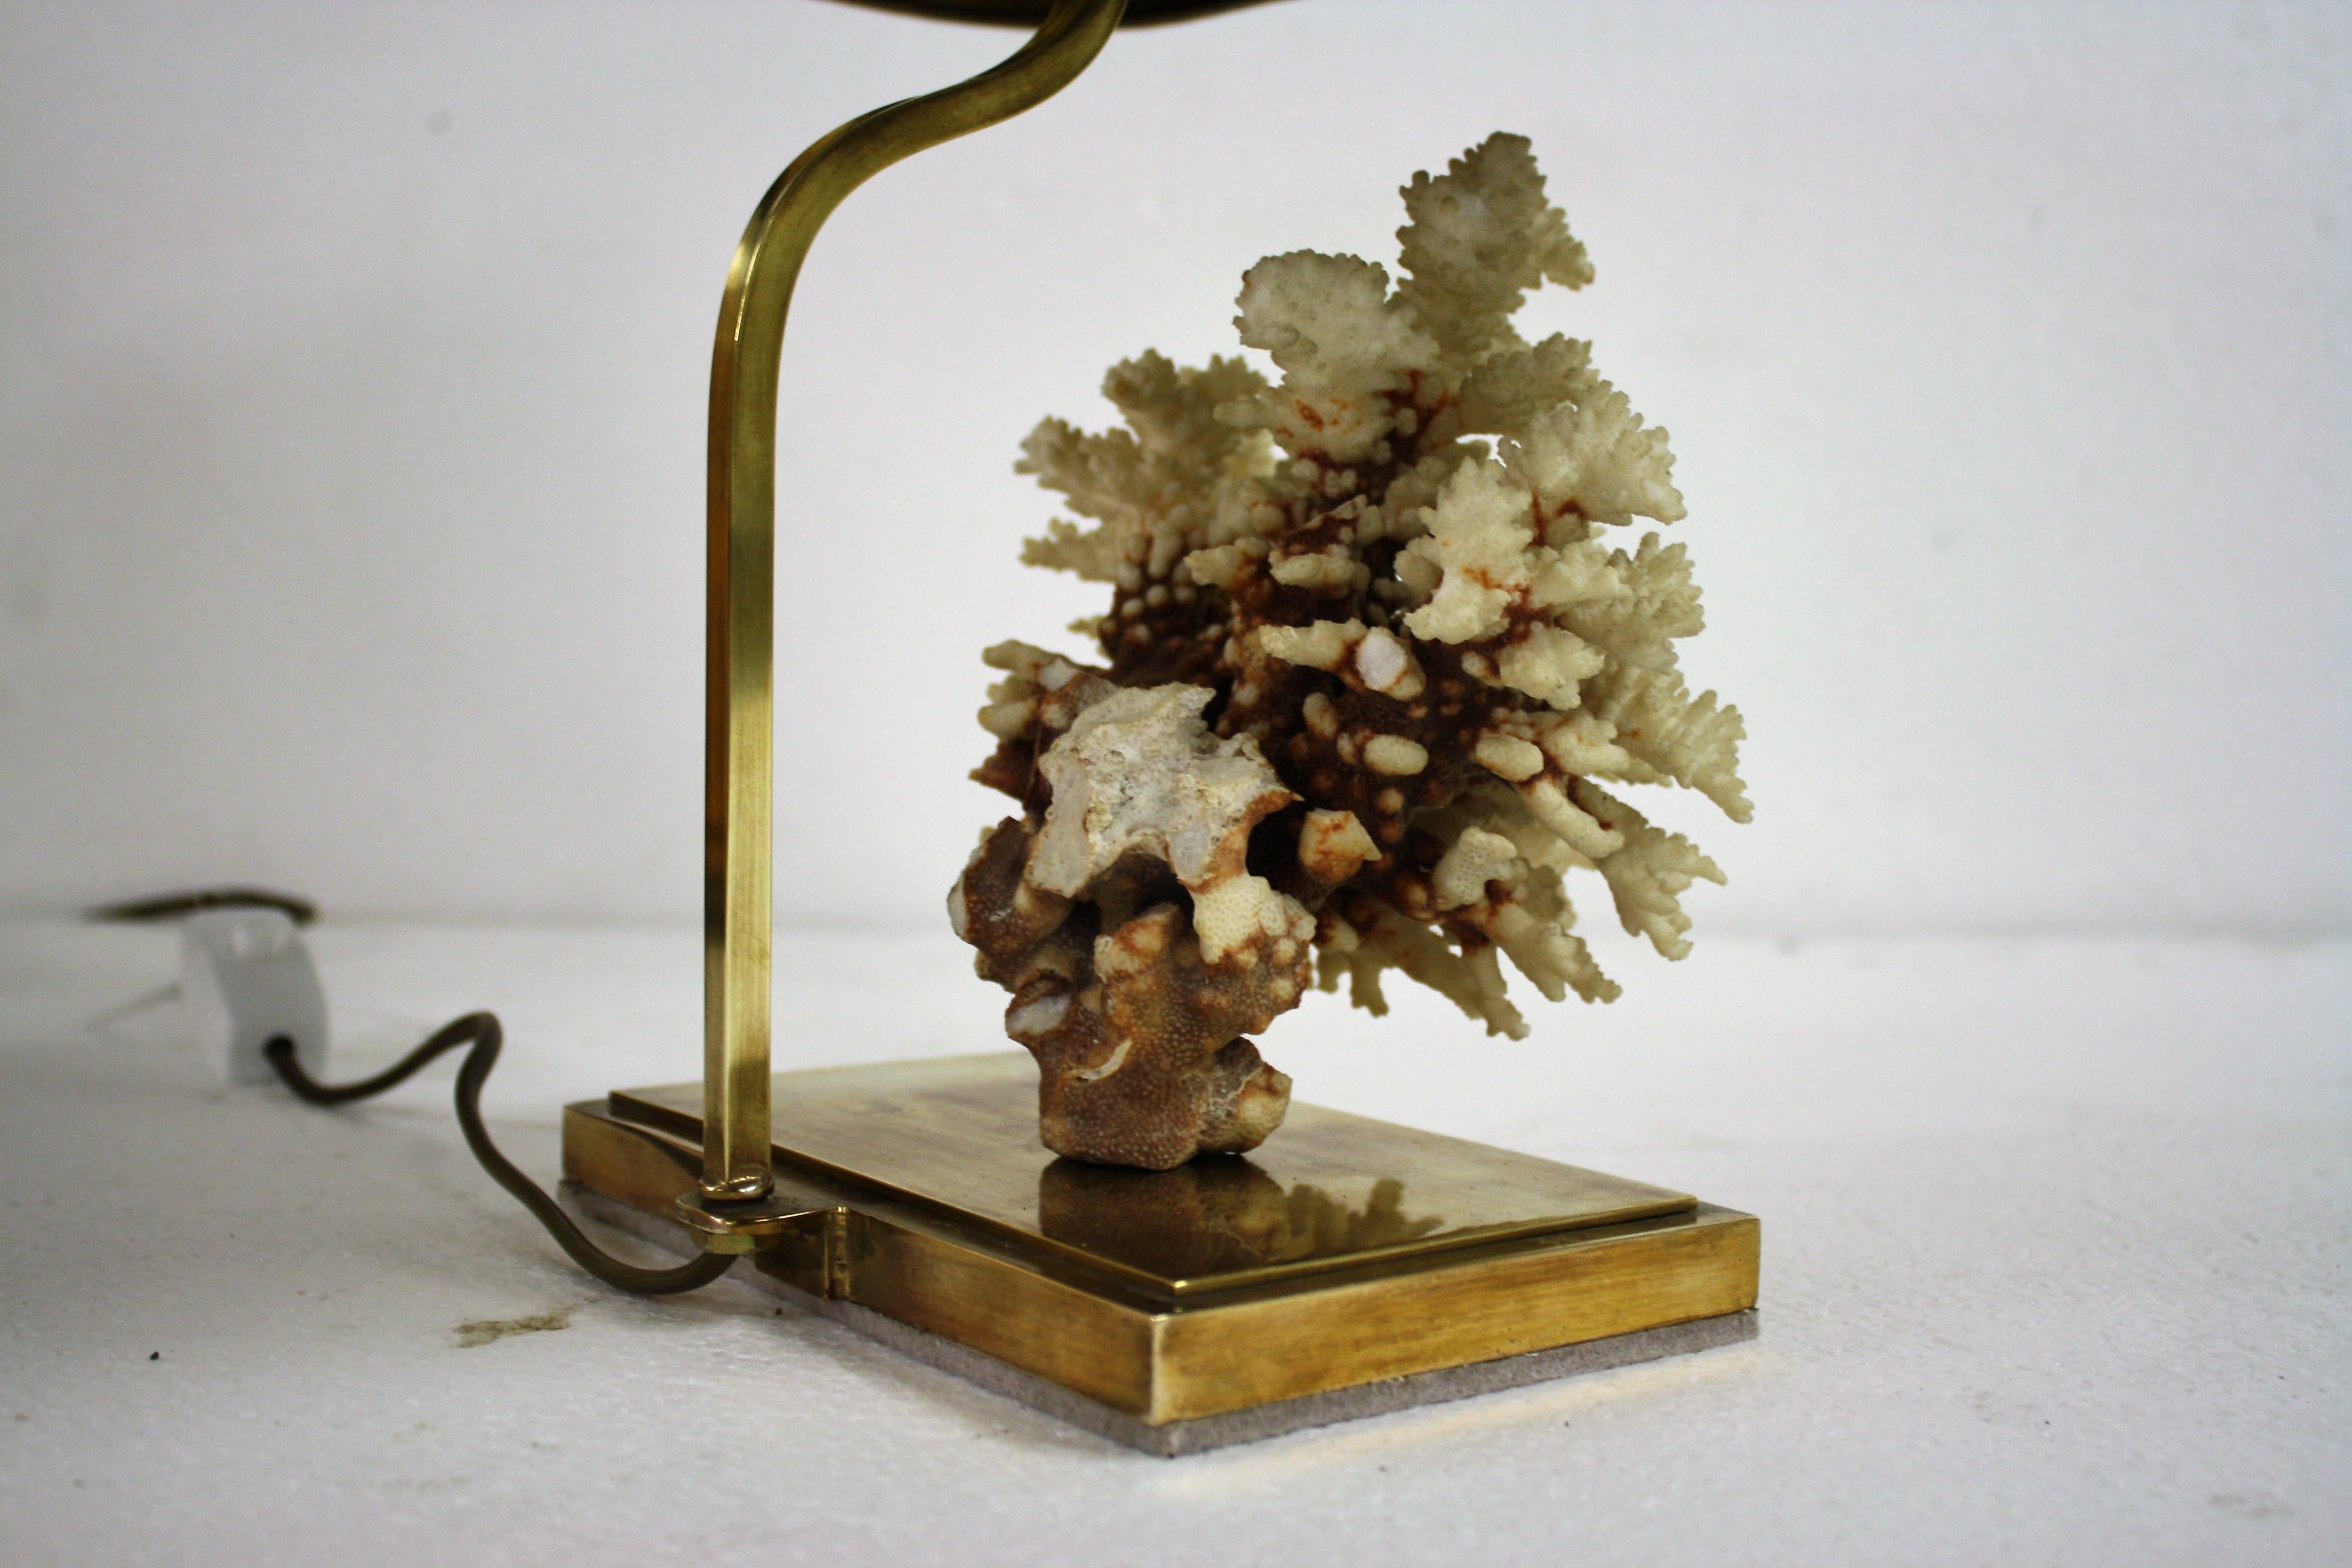 Charming real coral table lamp.

The table lamp consists of a real coral mounted on a patinated brass base.

This natural lamp brings a lovely sea-like atmosphere into a room.

The piece of coral has not been tempered with and is in full